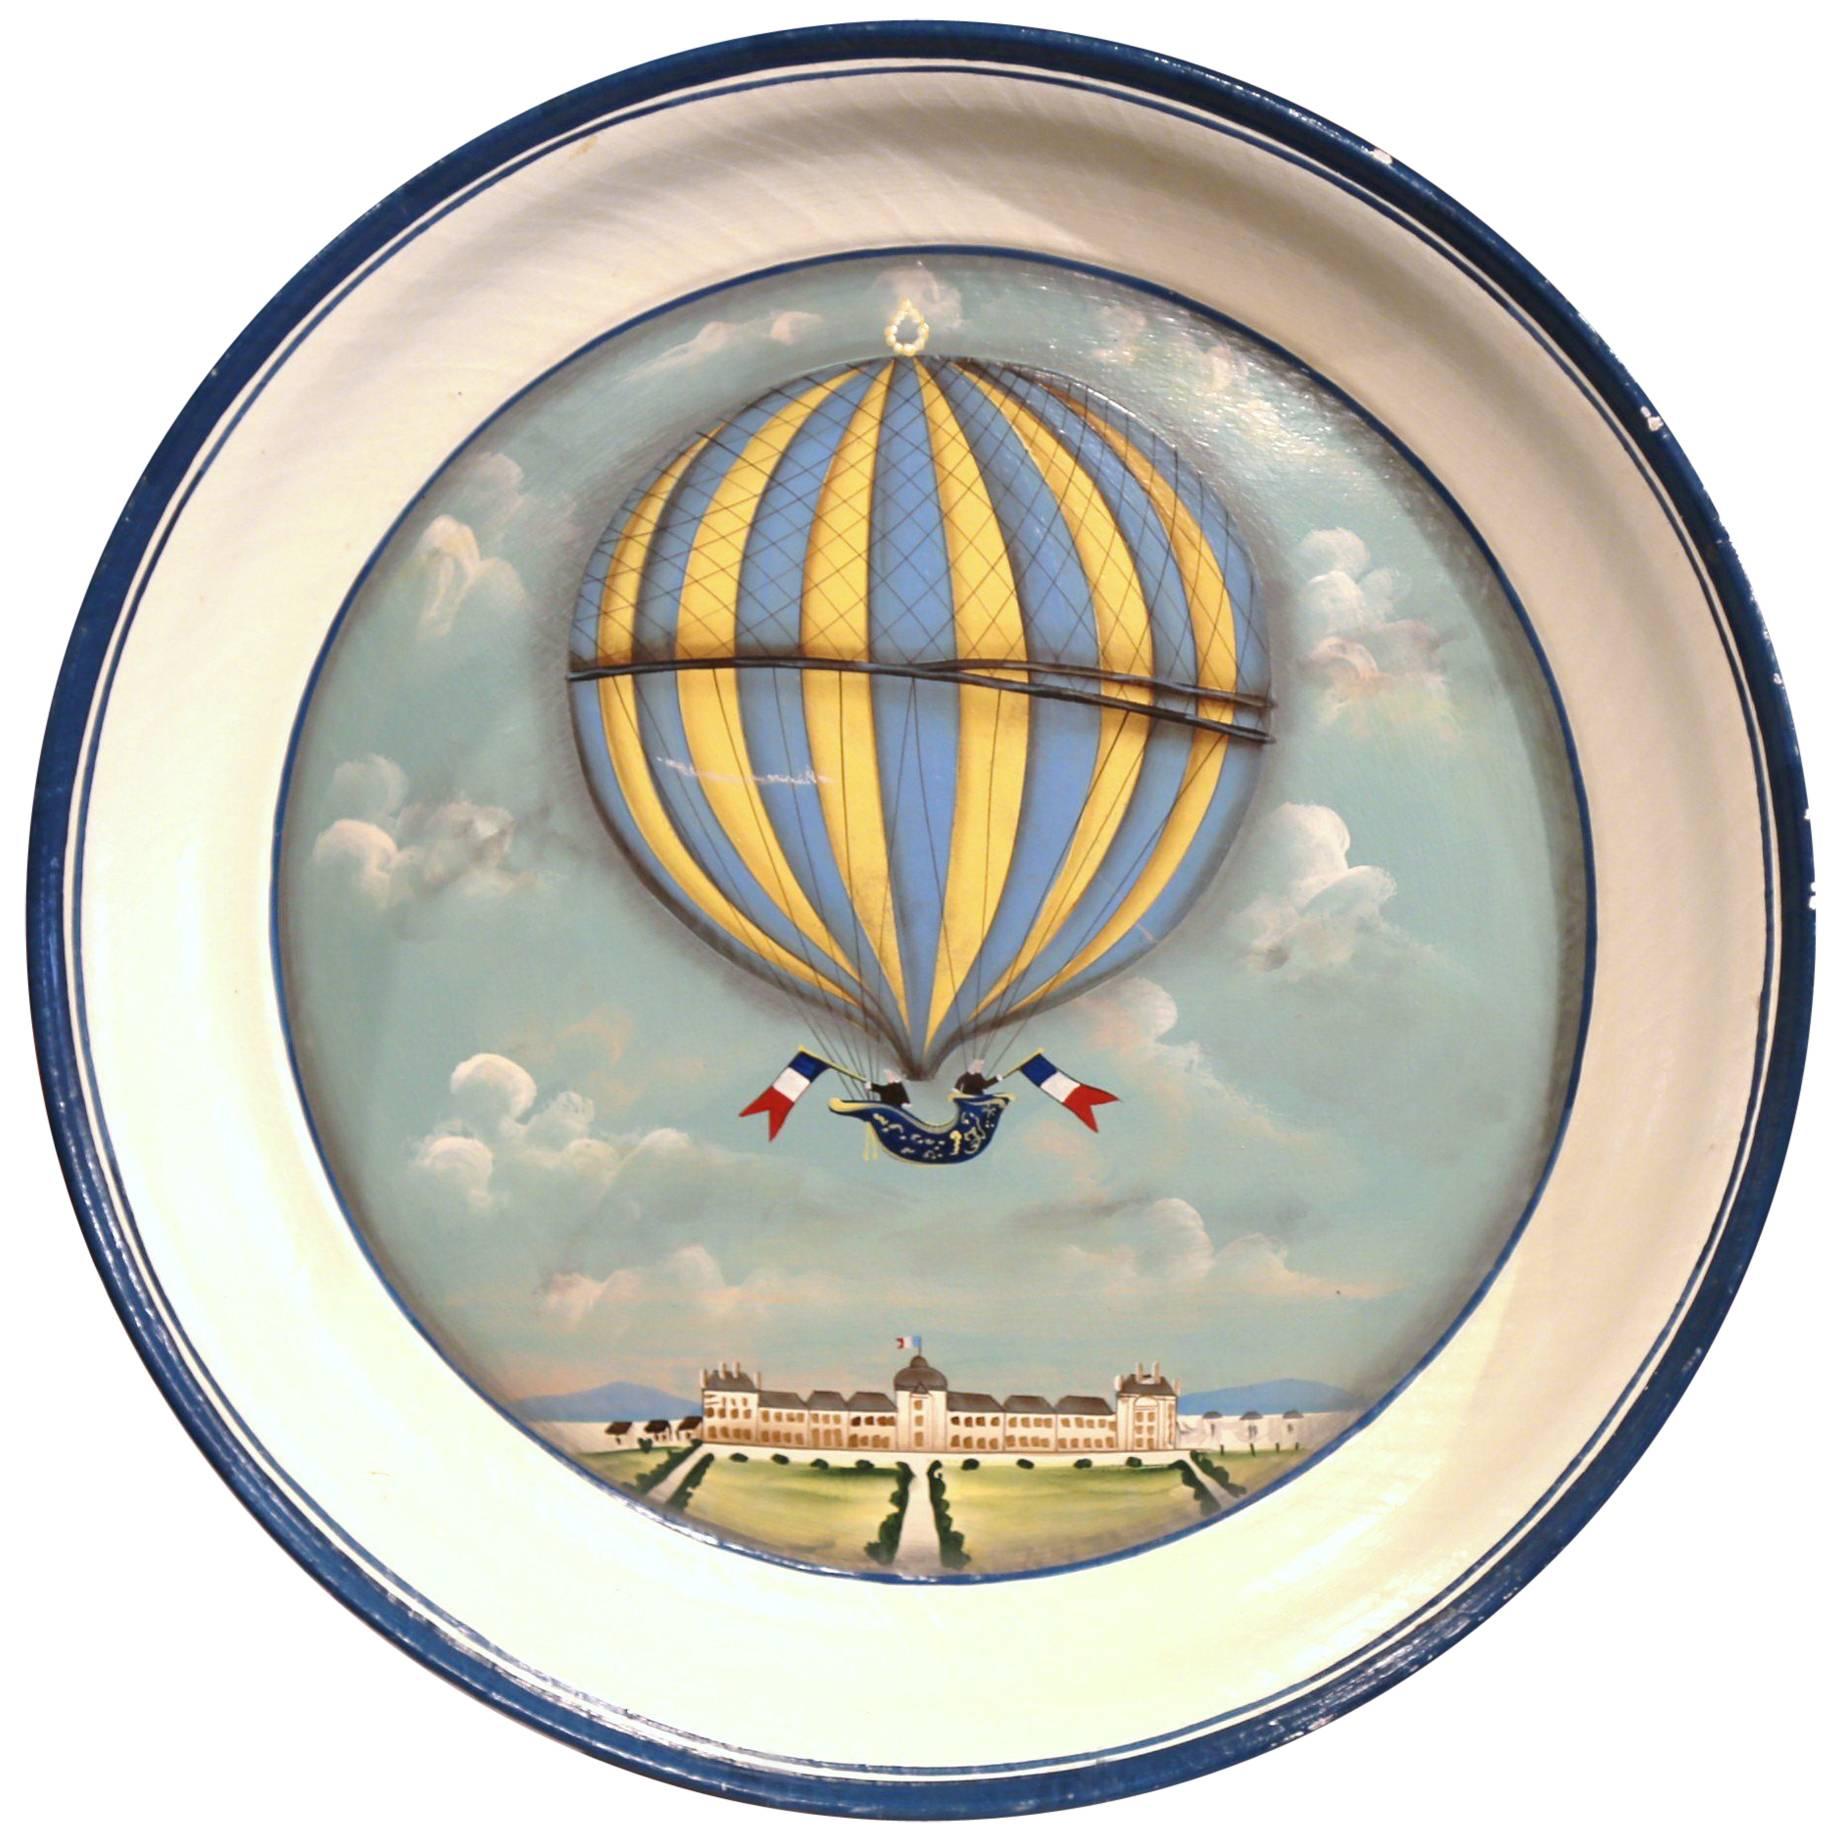 Late 20th Century French Hand-Painted Tole Tray with Colorful Hot Air Balloon